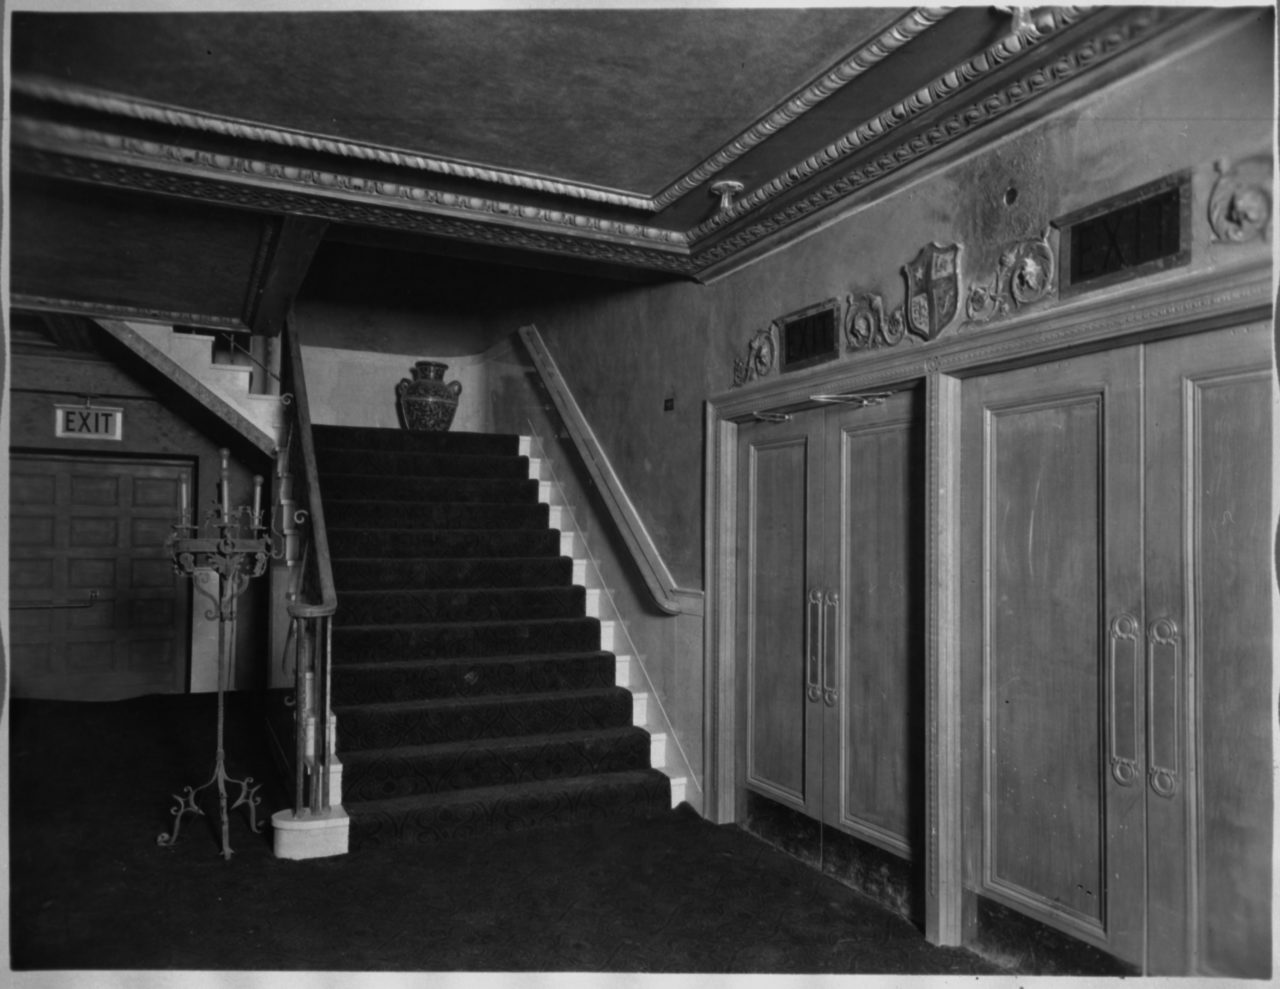 Orchestra stair leading to mezzanine lobby - c. 1927